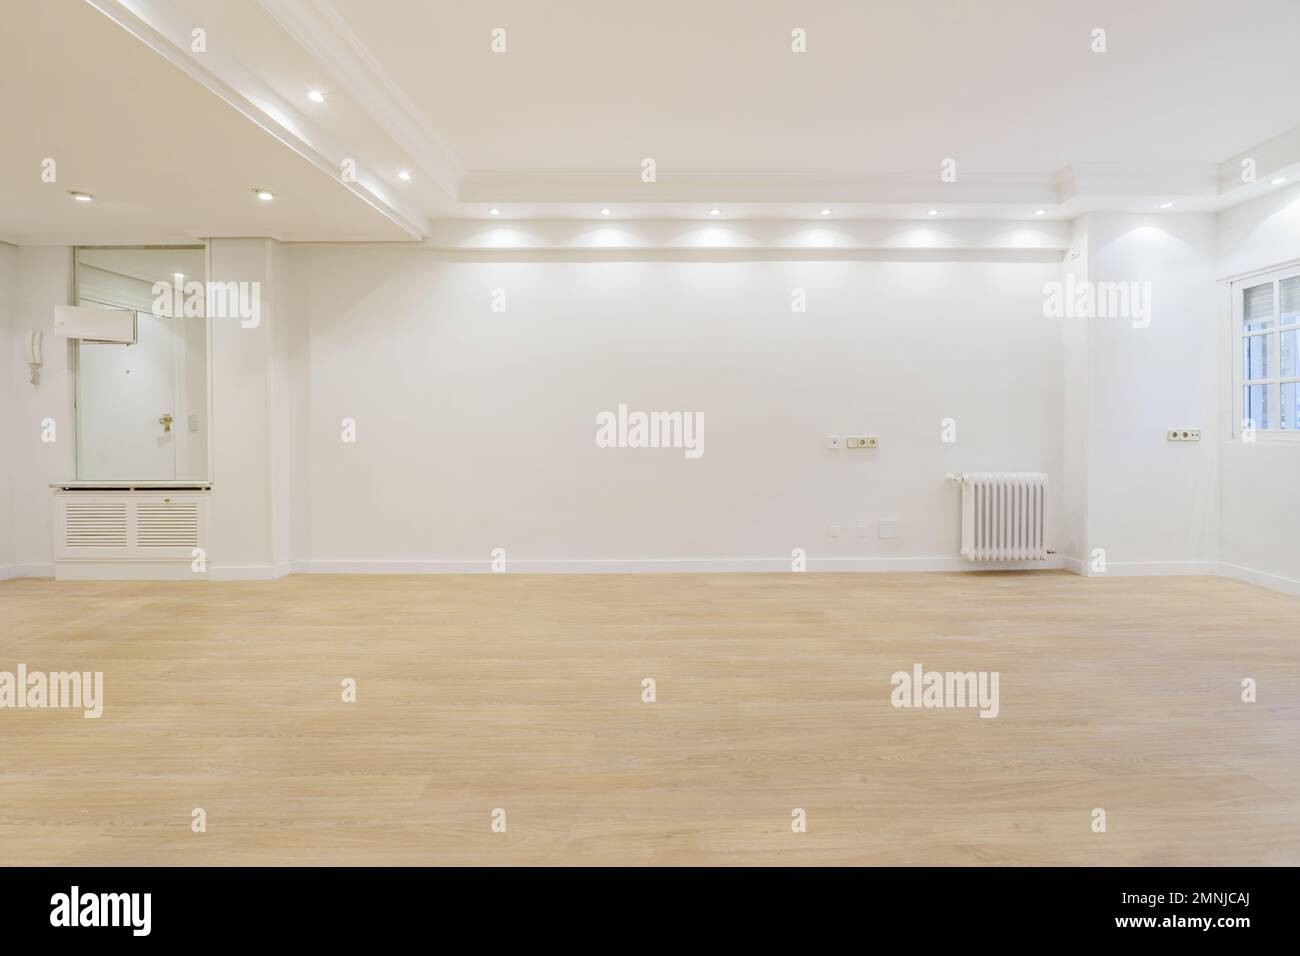 Empty living room with newly laid light hardwood floors, a mirrored sideboard and a white painted cast iron radiator Stock Photo